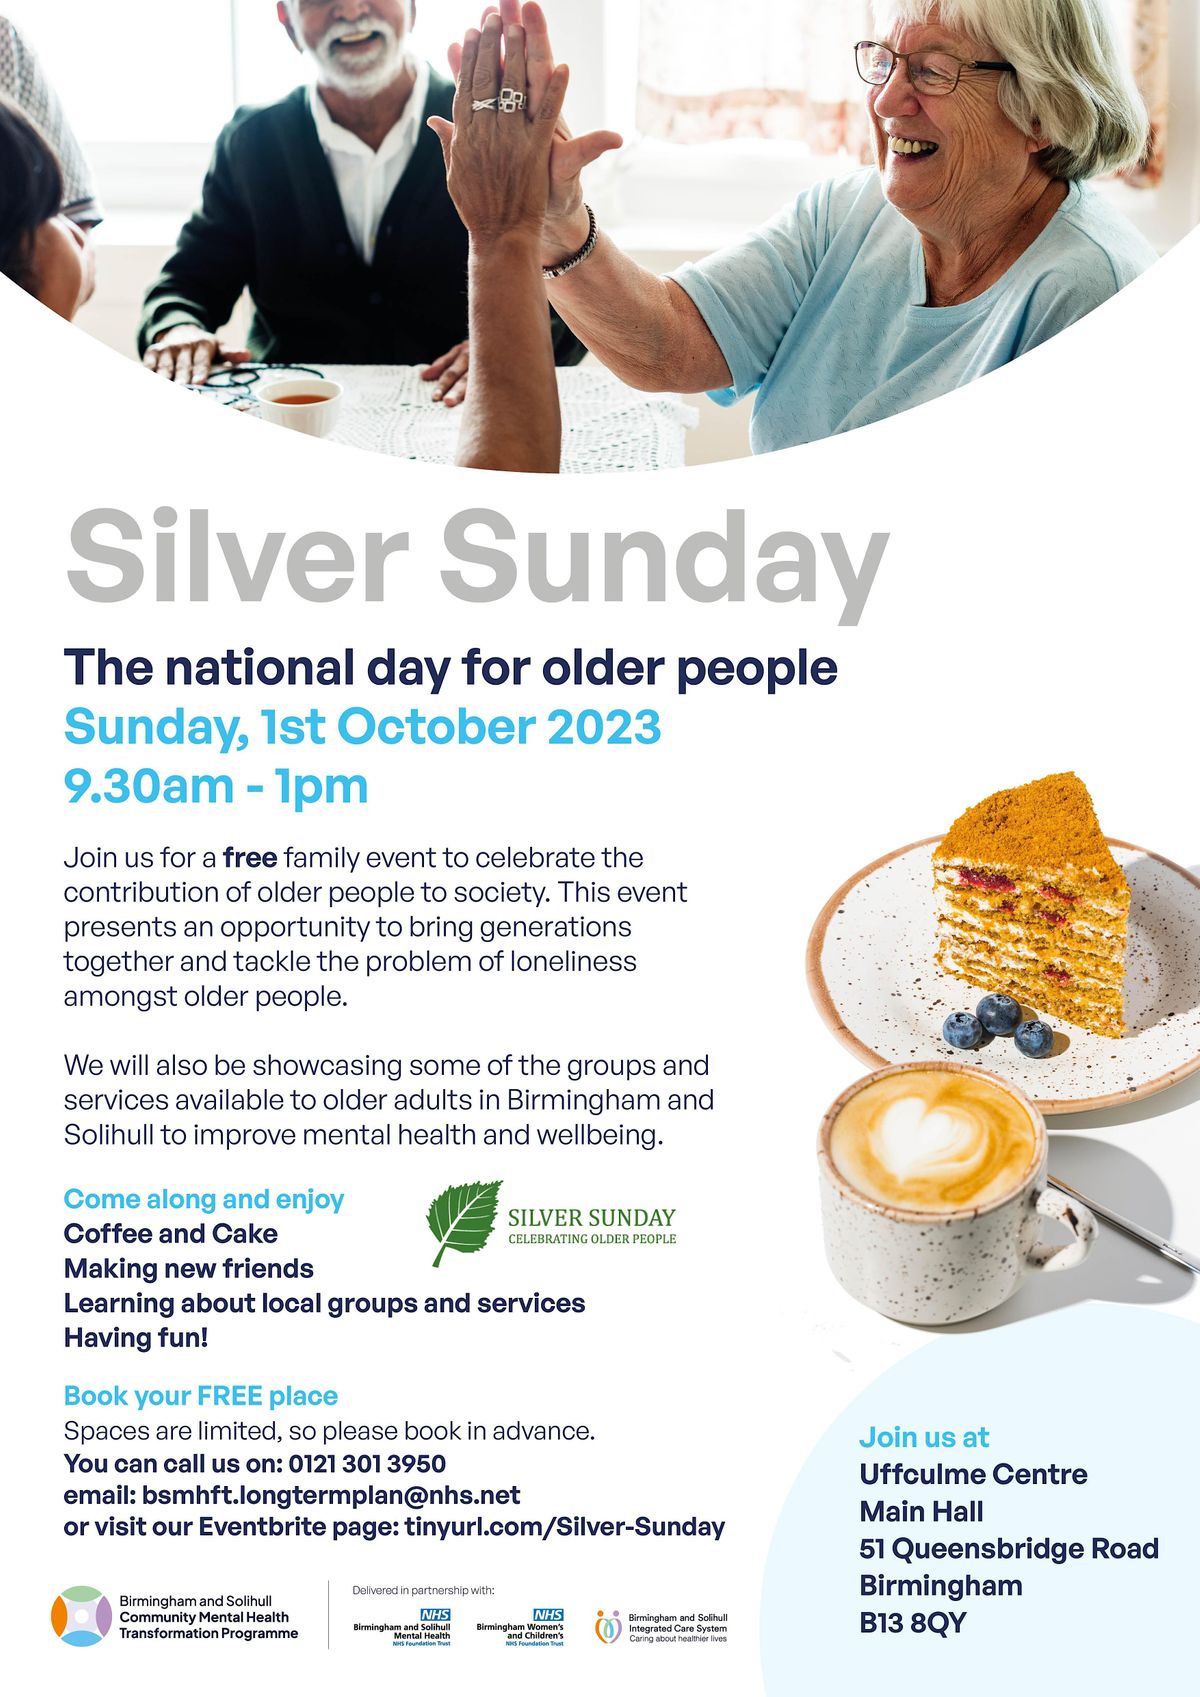 Silver Sunday National Day for Older People Coffee Morning